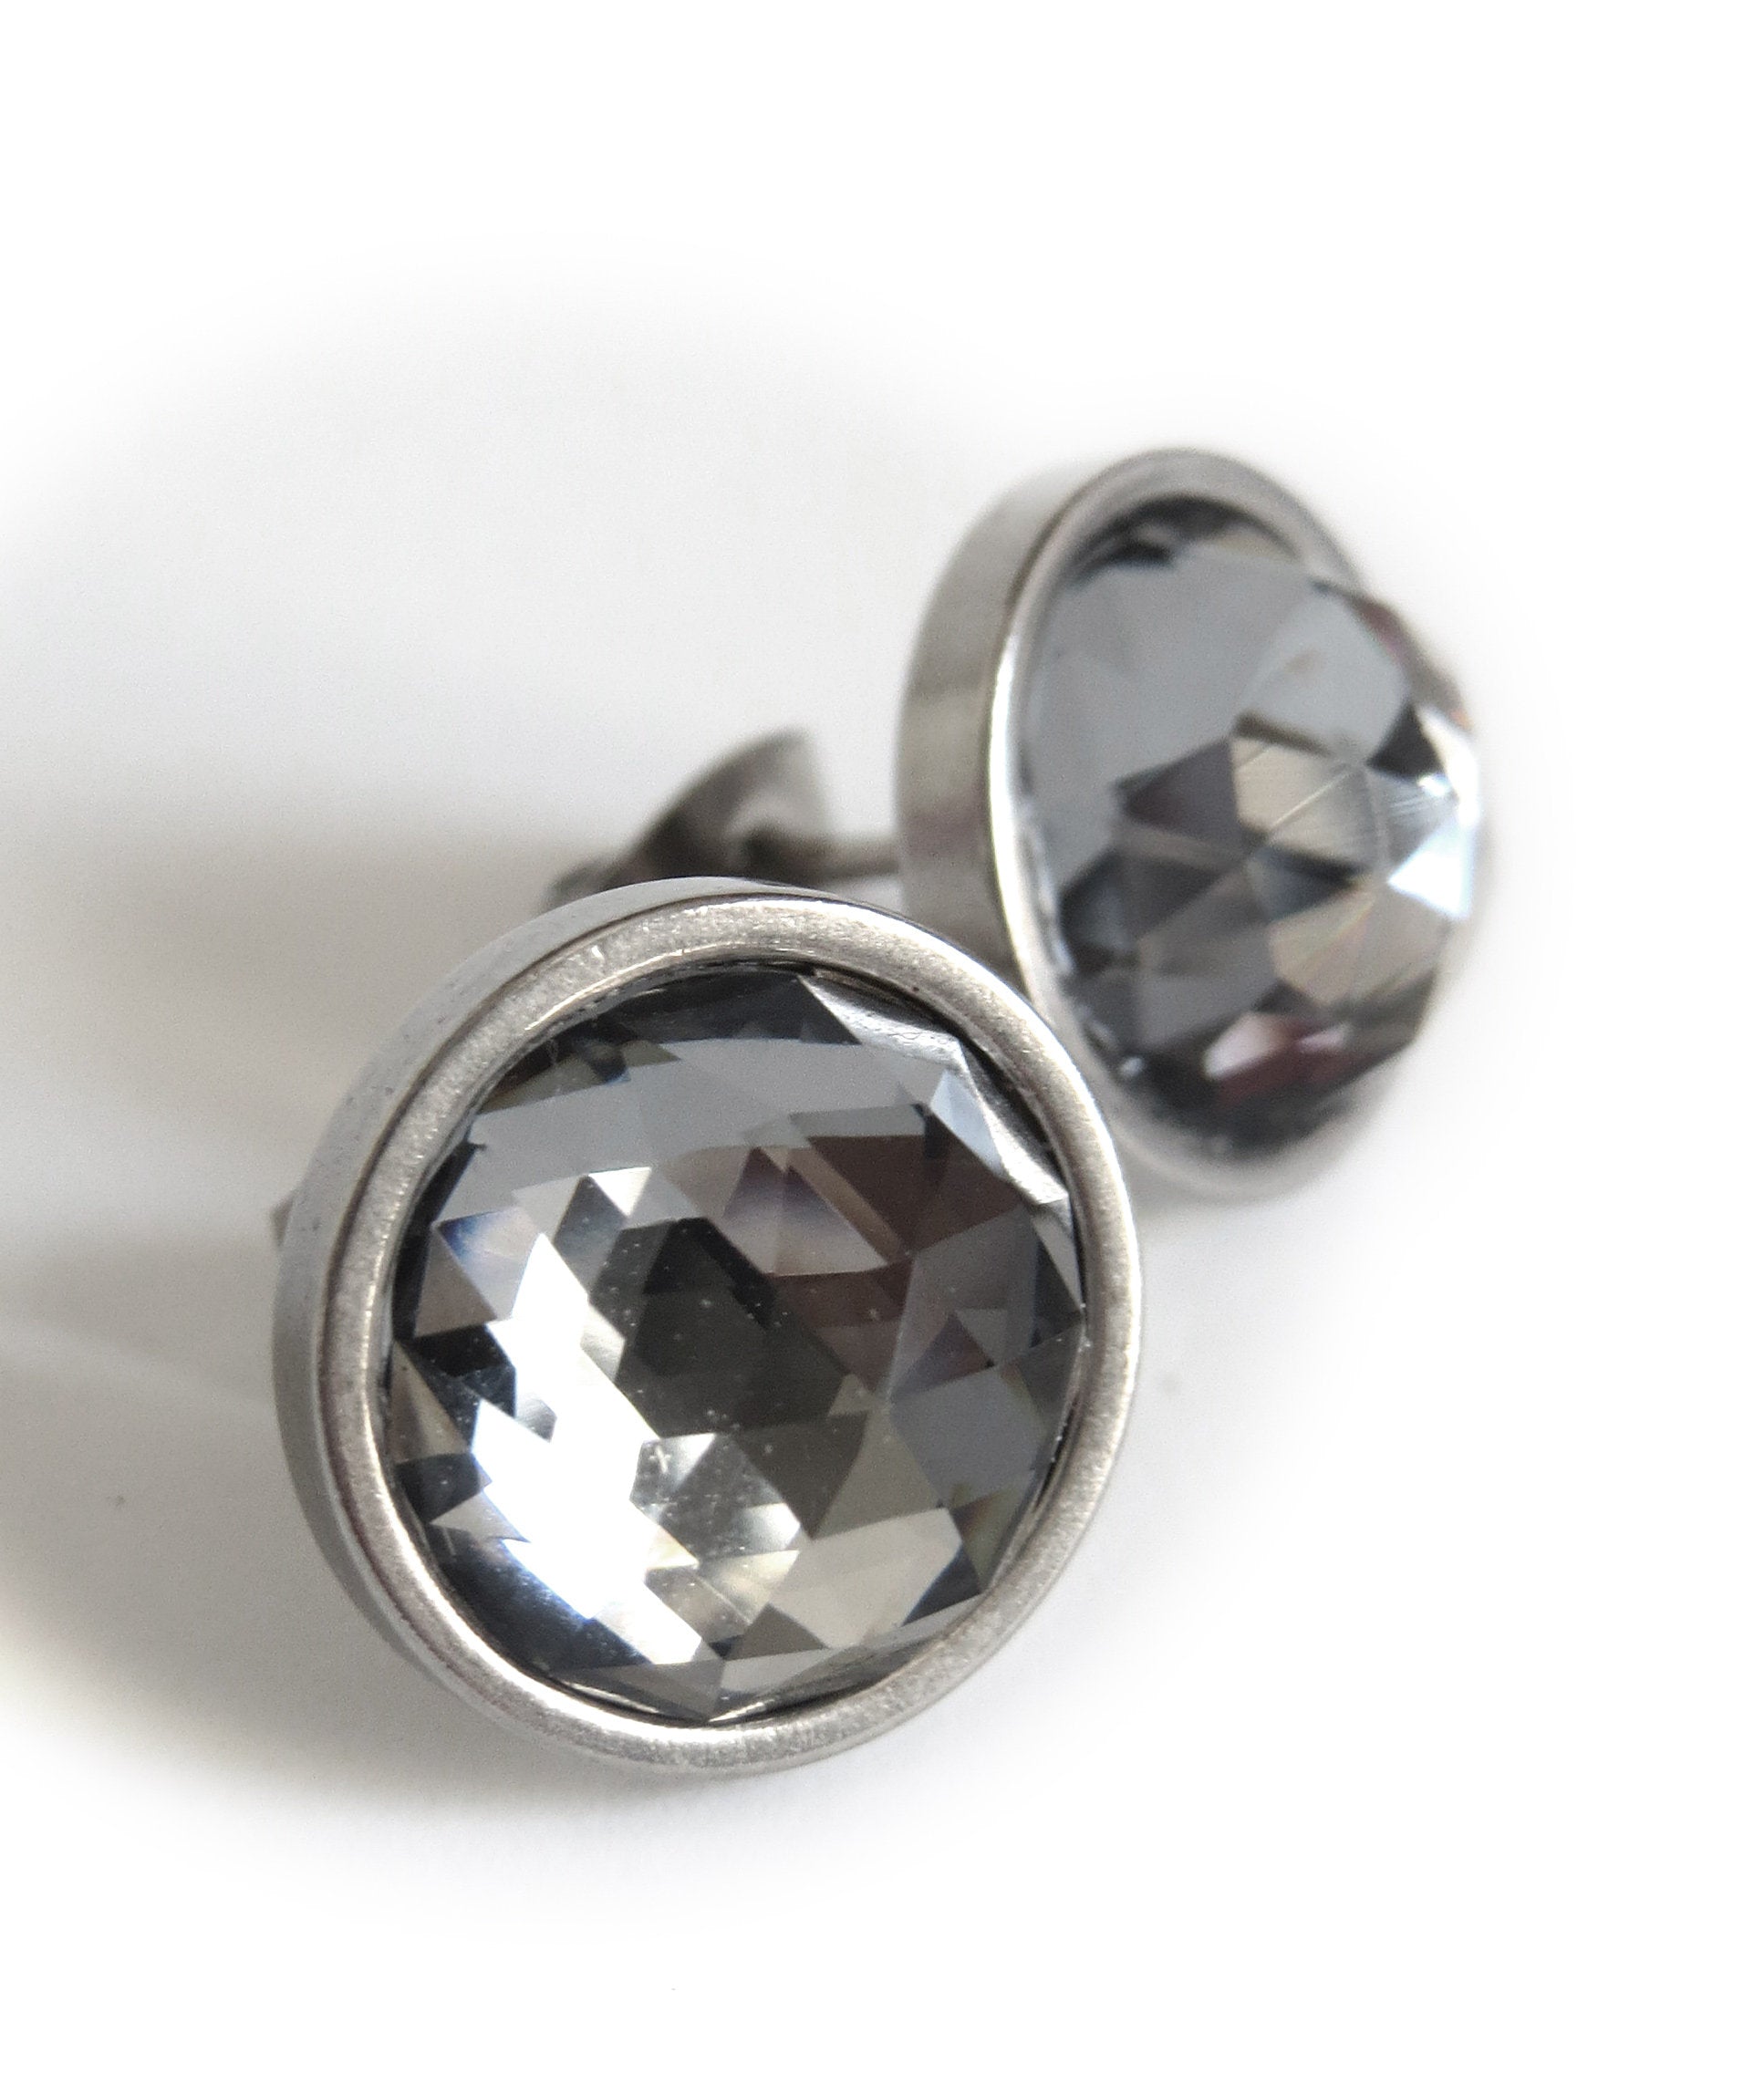 Extra Large Modern Stud Earrings with Round Black Night Faceted Swarovski Crystal, Stainless Steel Bezels, Unisex Women Mens Post Earrings